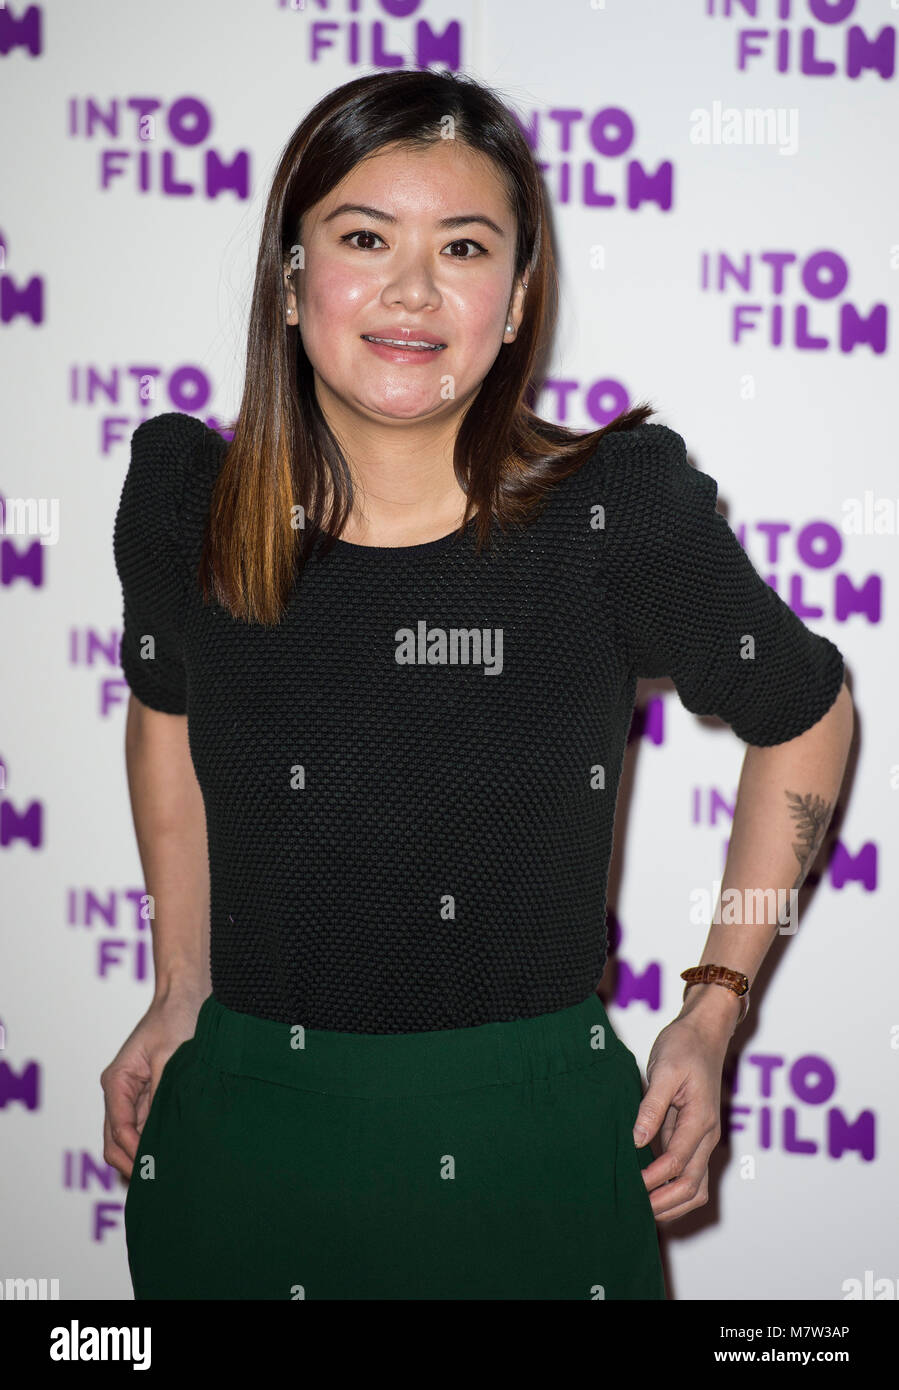 London, UK. 13th March, 2018.  Katie Leung attends the Into Film Awards at BFI Southbank on March 13, 2018 in London, England. Credit: Gary Mitchell, GMP Media/Alamy Live News Stock Photo